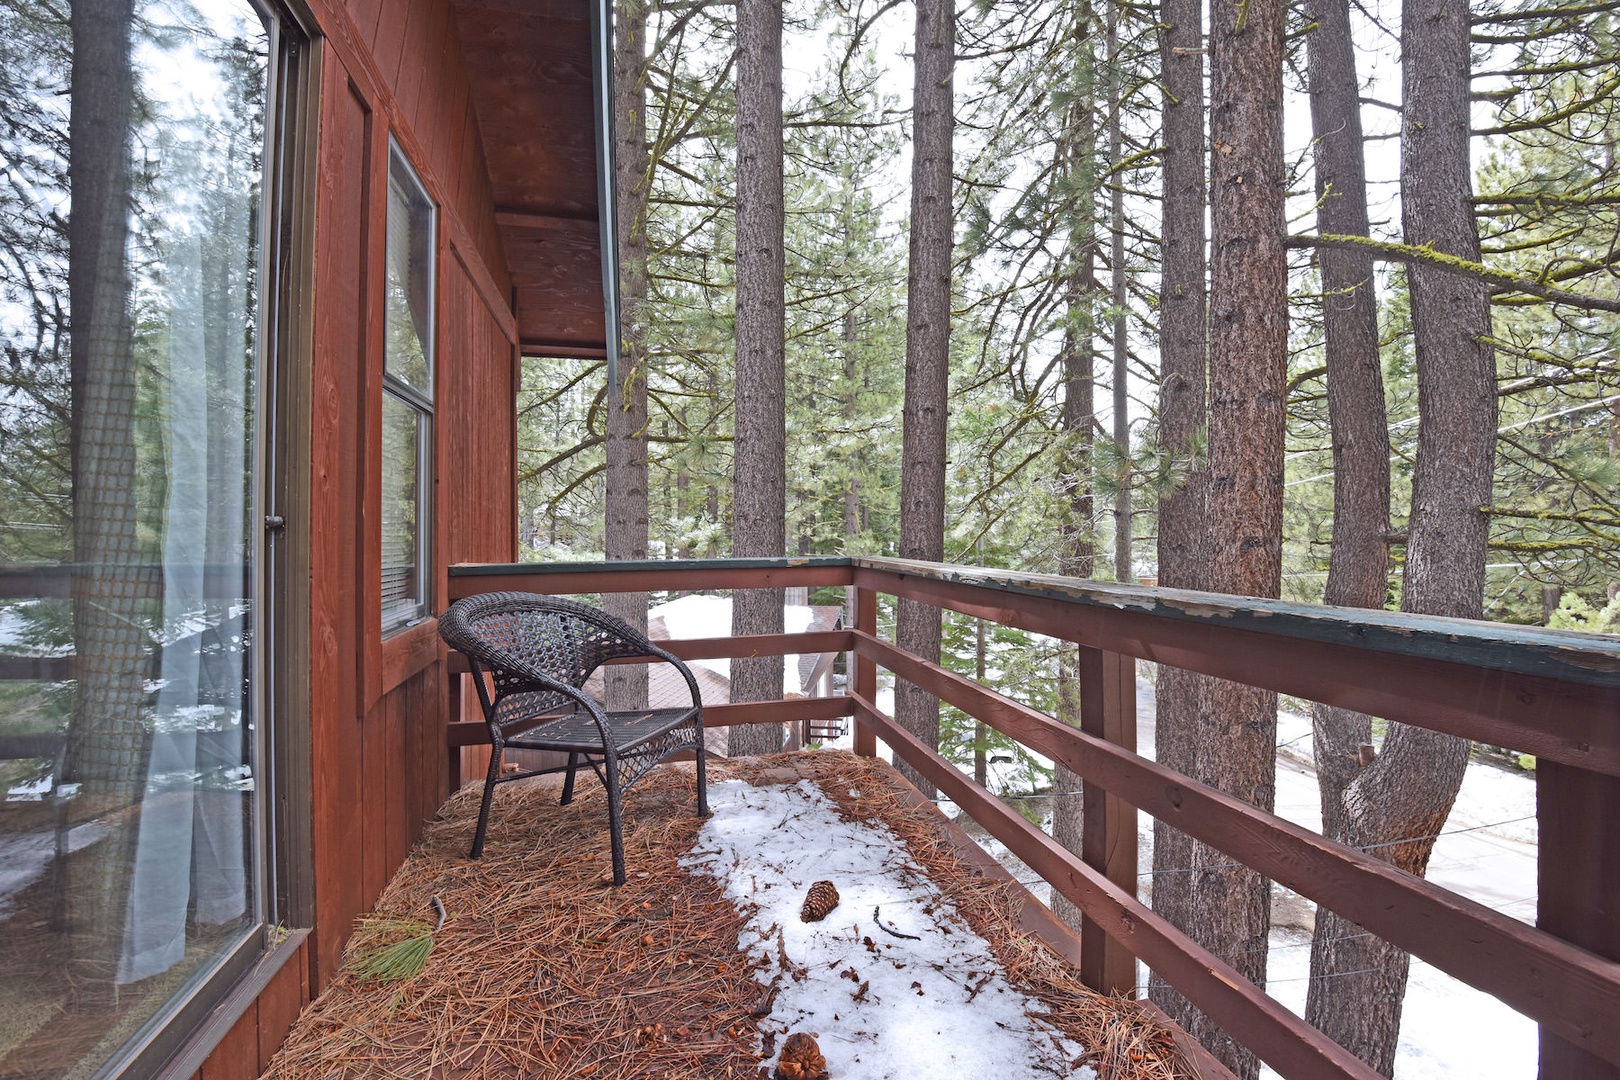 Master bedroom balcony with forest view. Note* - the deck is closed from guest use for repair.*